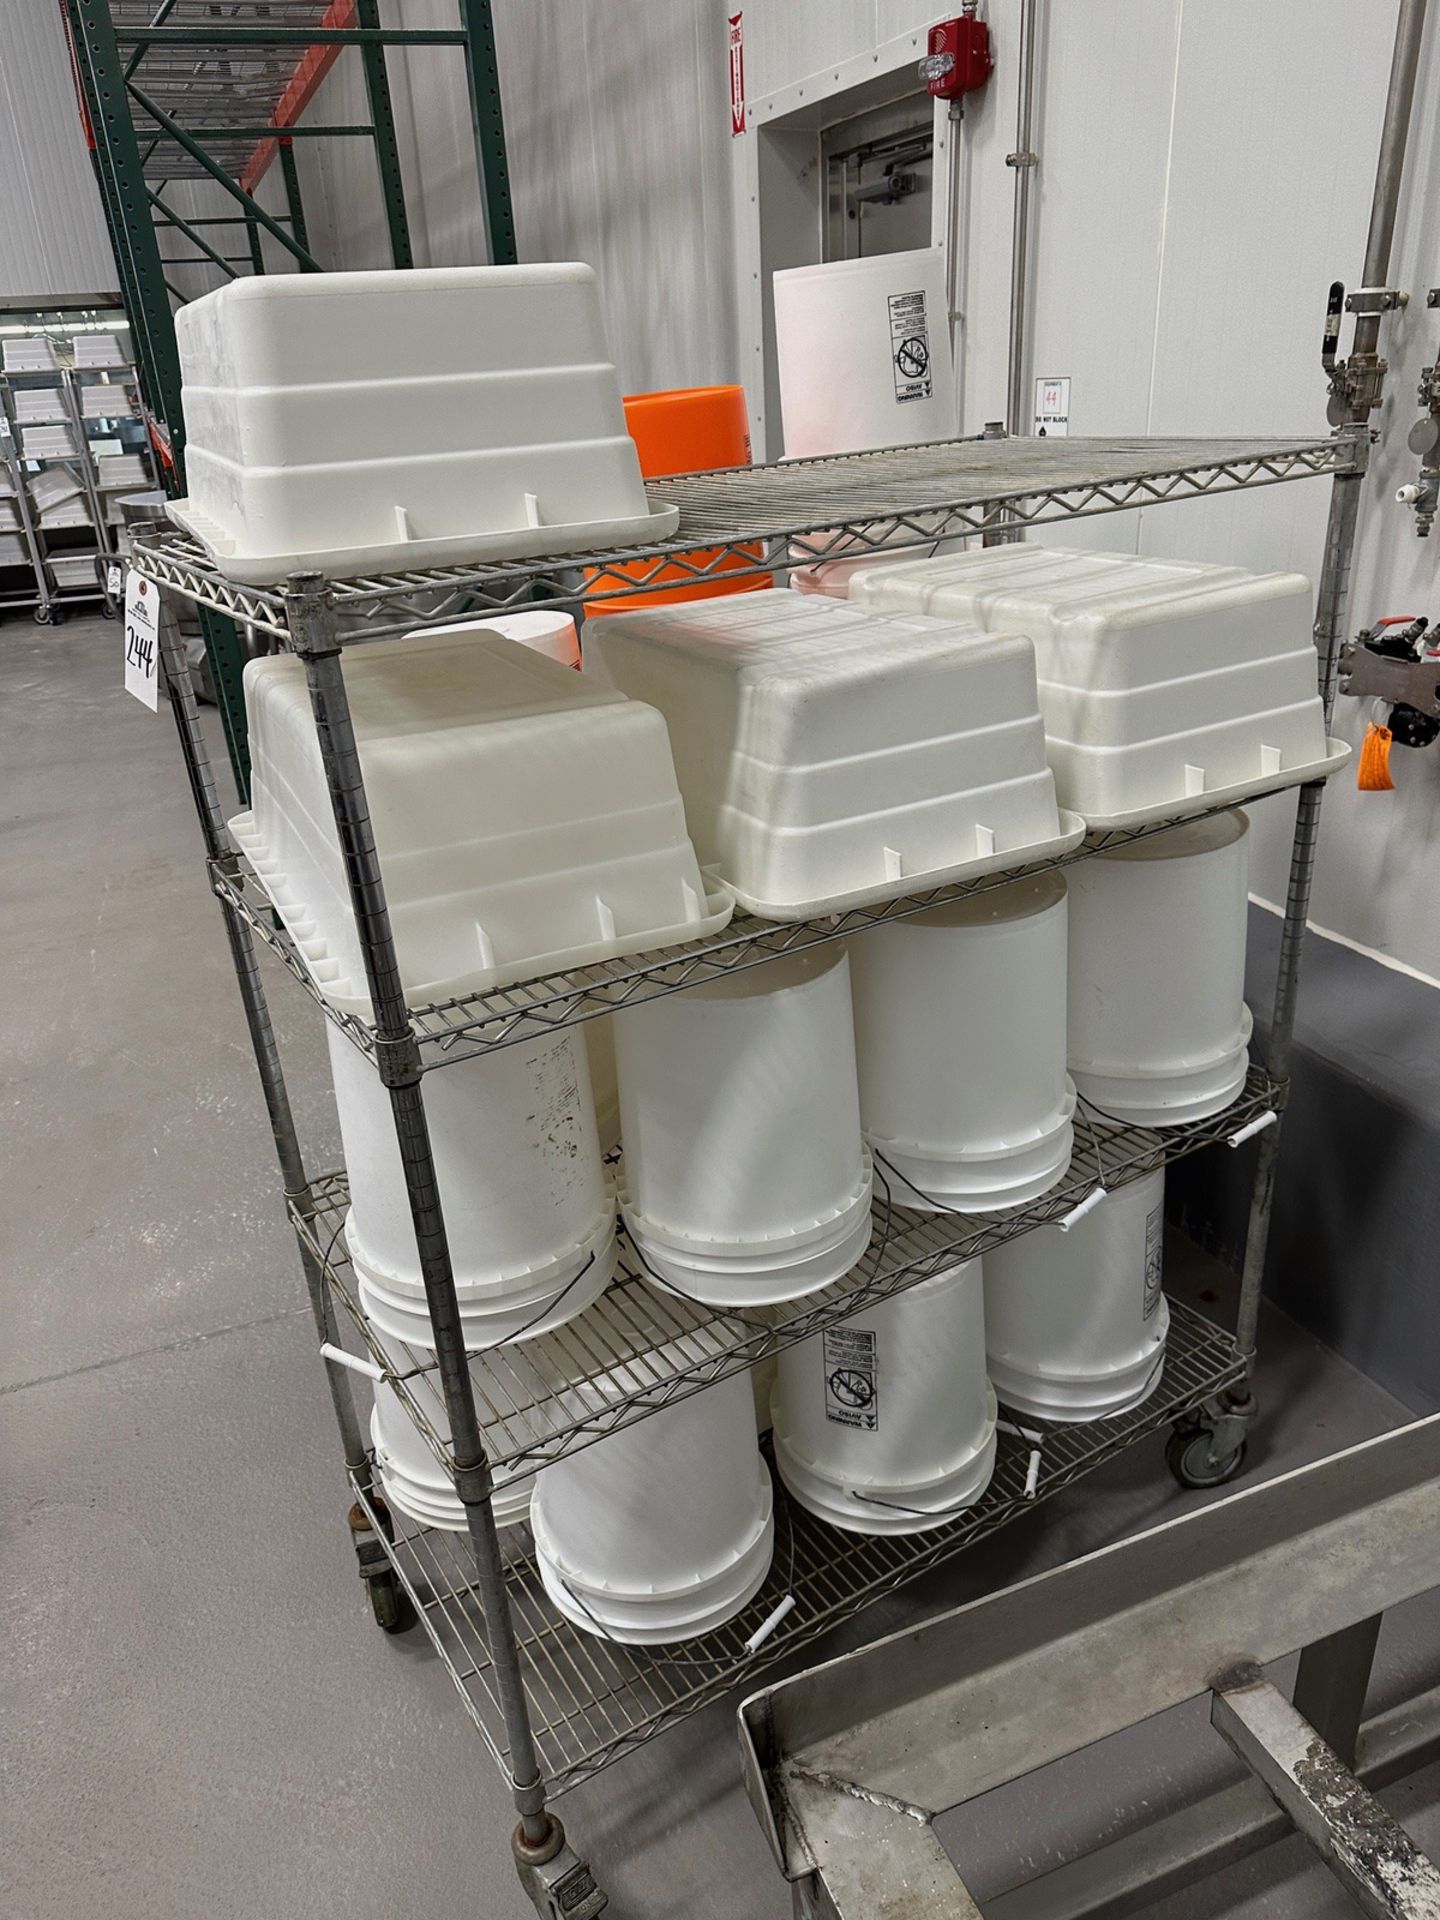 Lot of White Plastic Bins and Buckets with Carts | Rig Fee $75 - Bild 2 aus 2